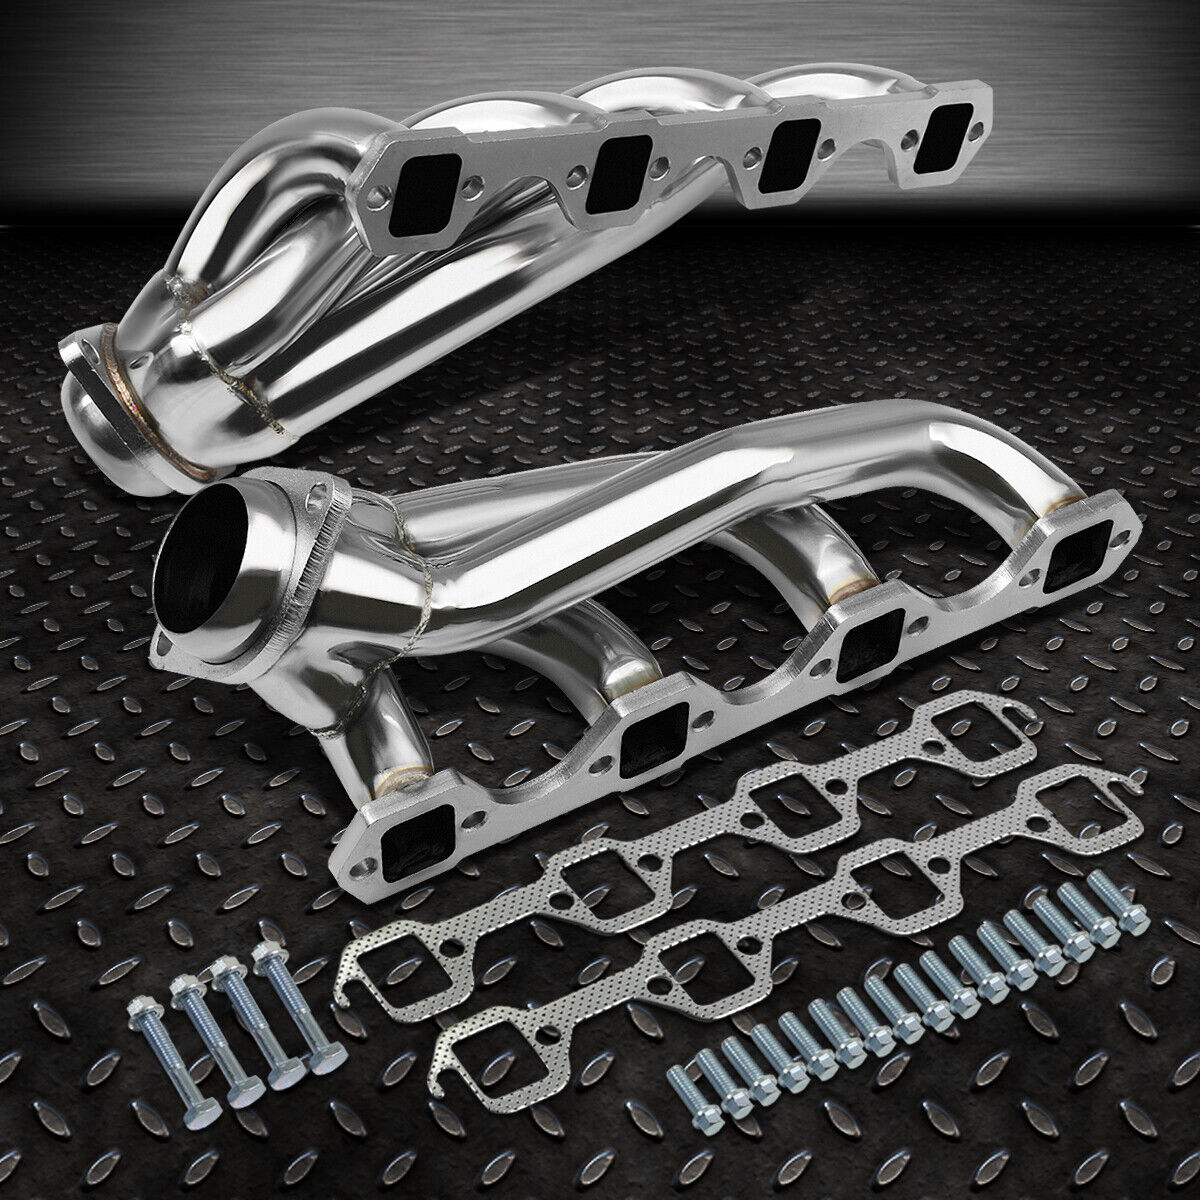 FOR 79-93 FORD MUSTANG GT/LX/SVT 5.0 V8 STAINLESS STEEL EXHAUST MANIFOLD HEADER